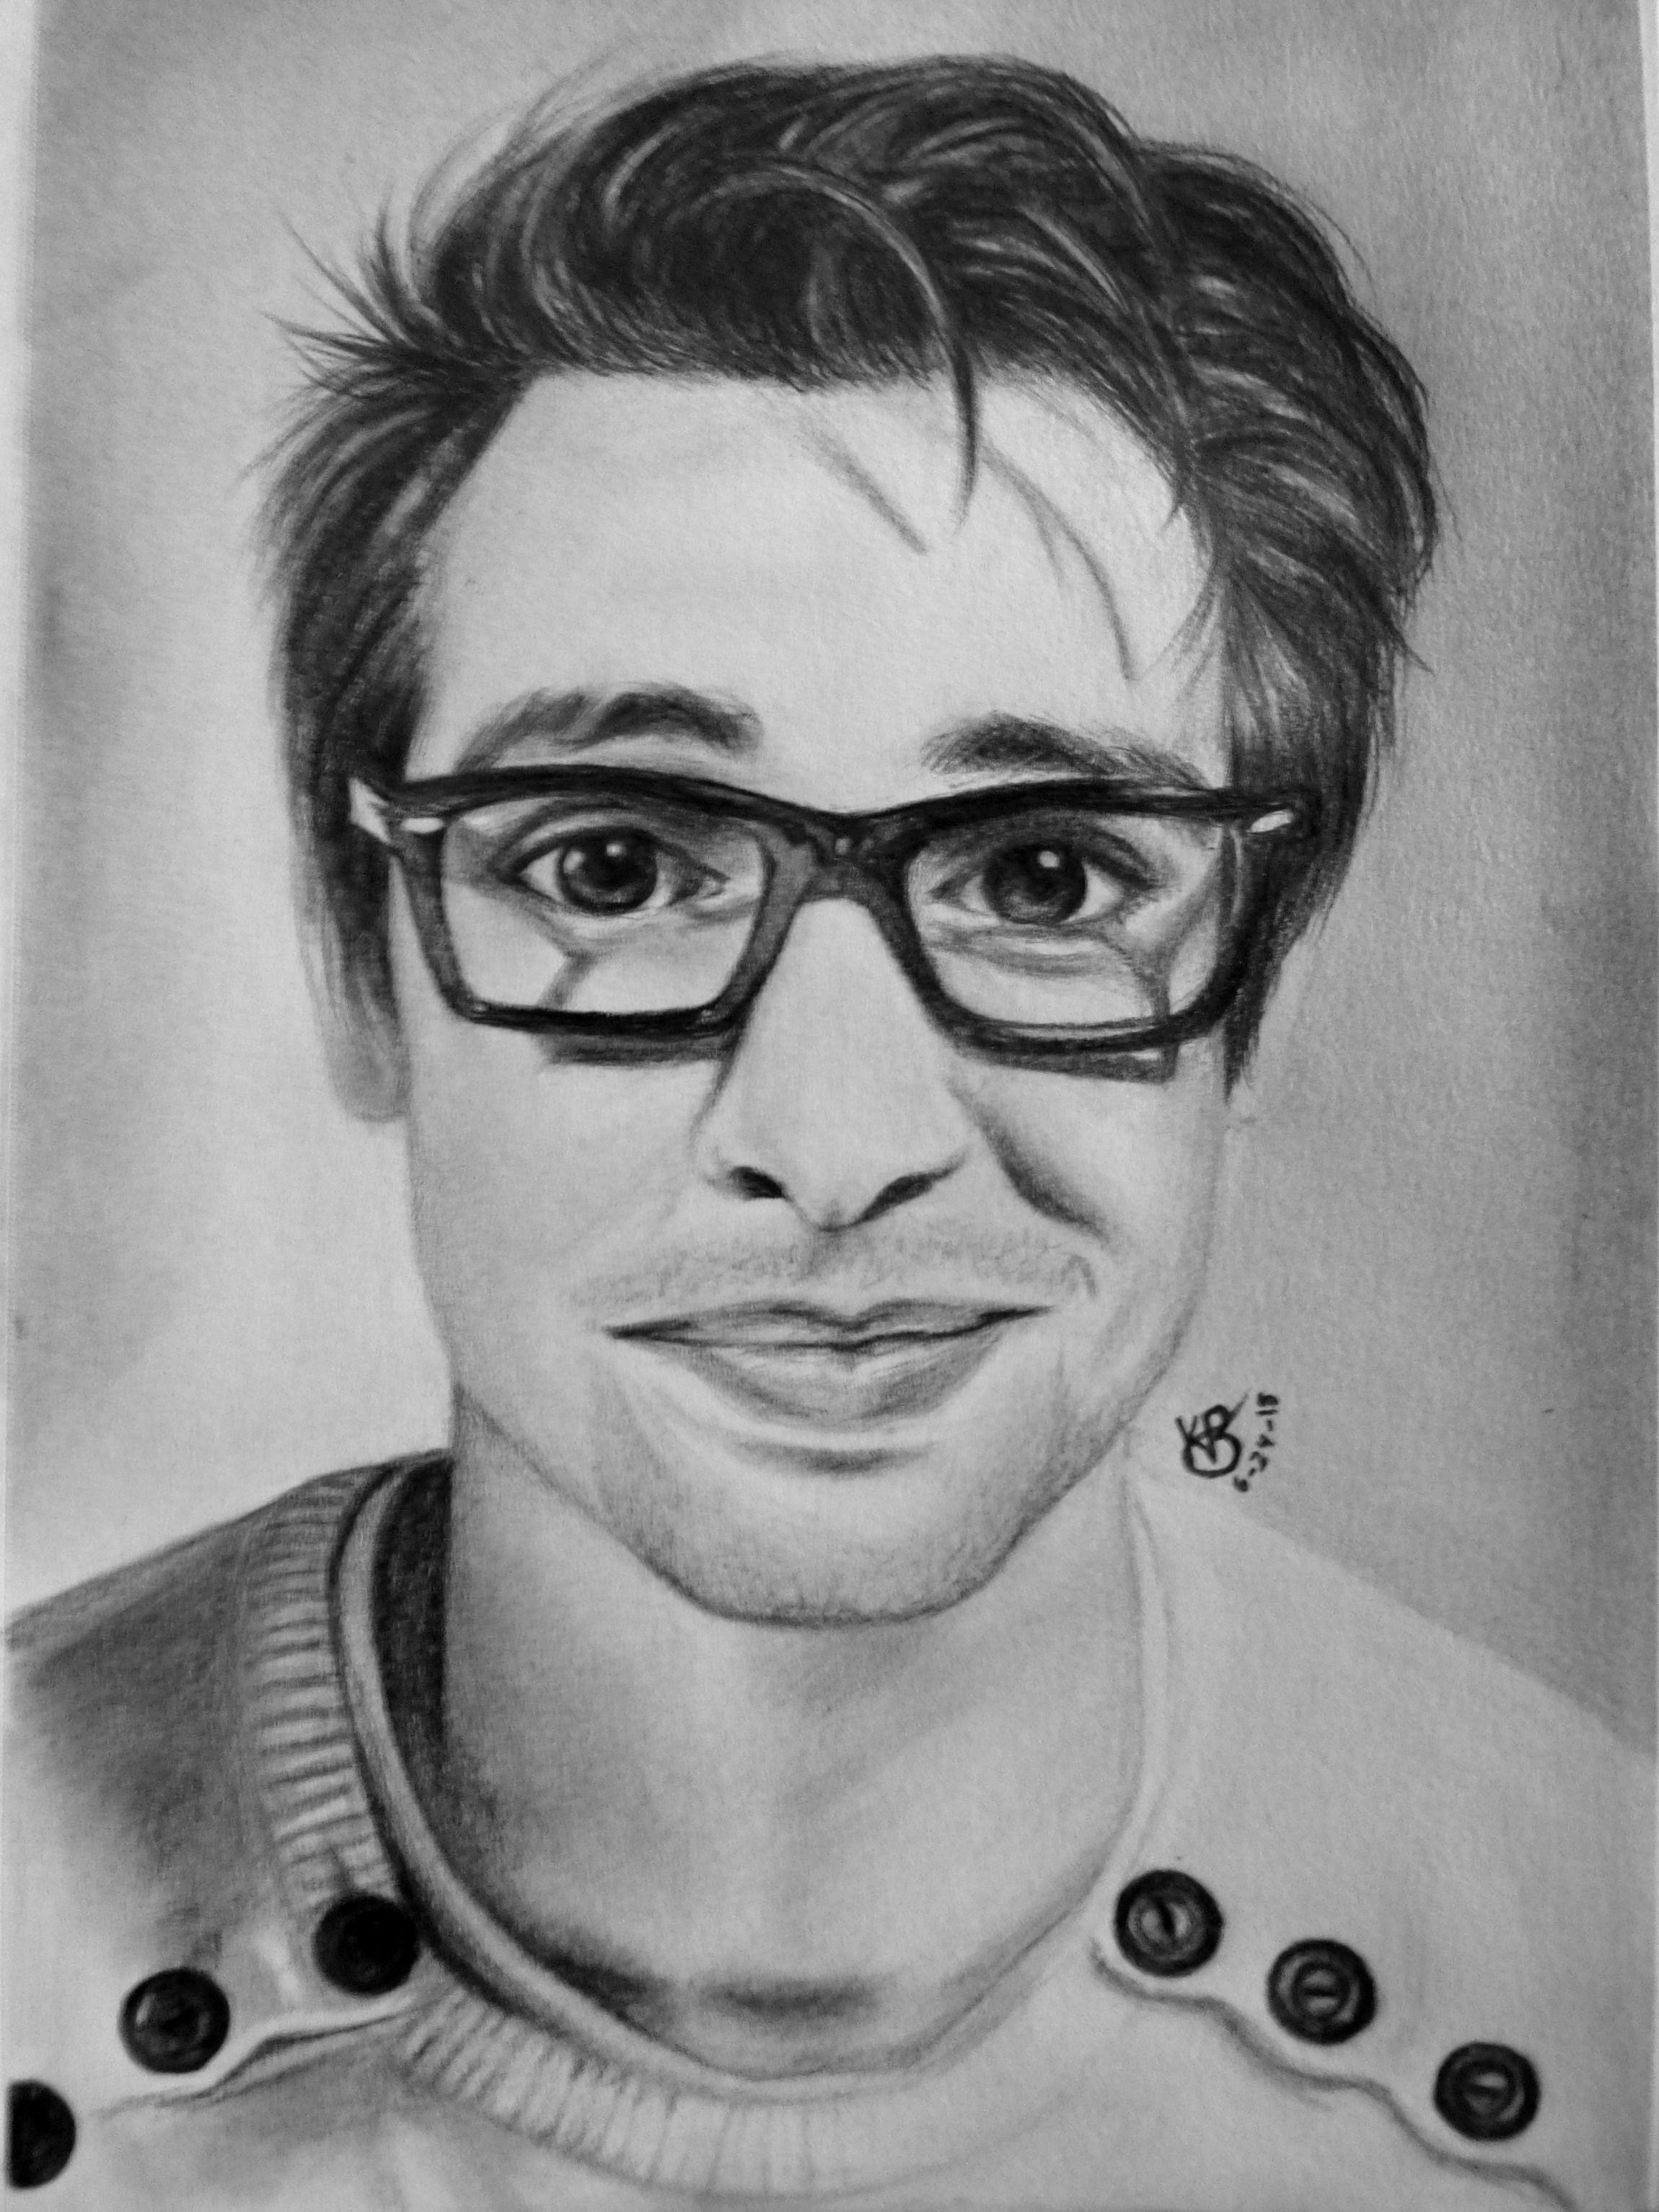 Brendon Urie Portrait (Panic! At The Disco)